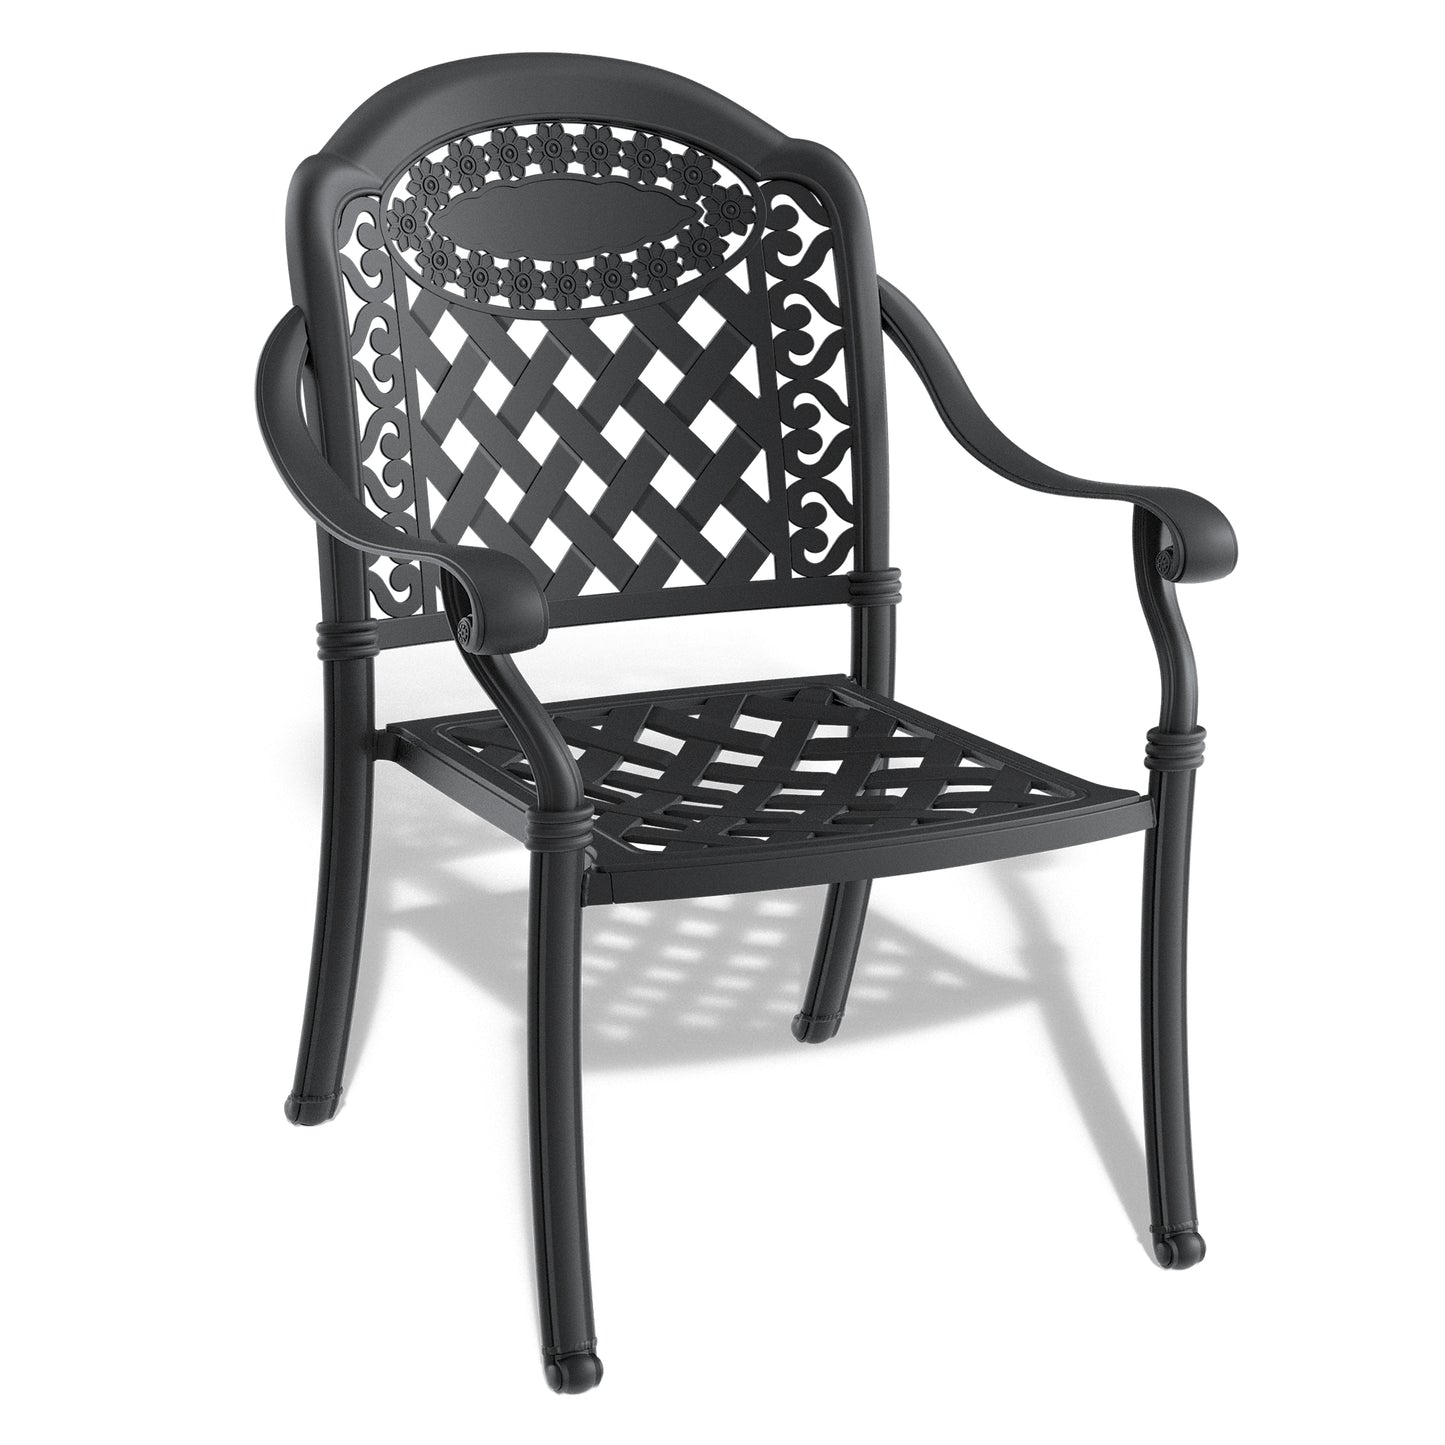 7-Piece Set Of Cast Aluminum Patio Furniture  With Black Frame and  Seat Cushions In Random Colors